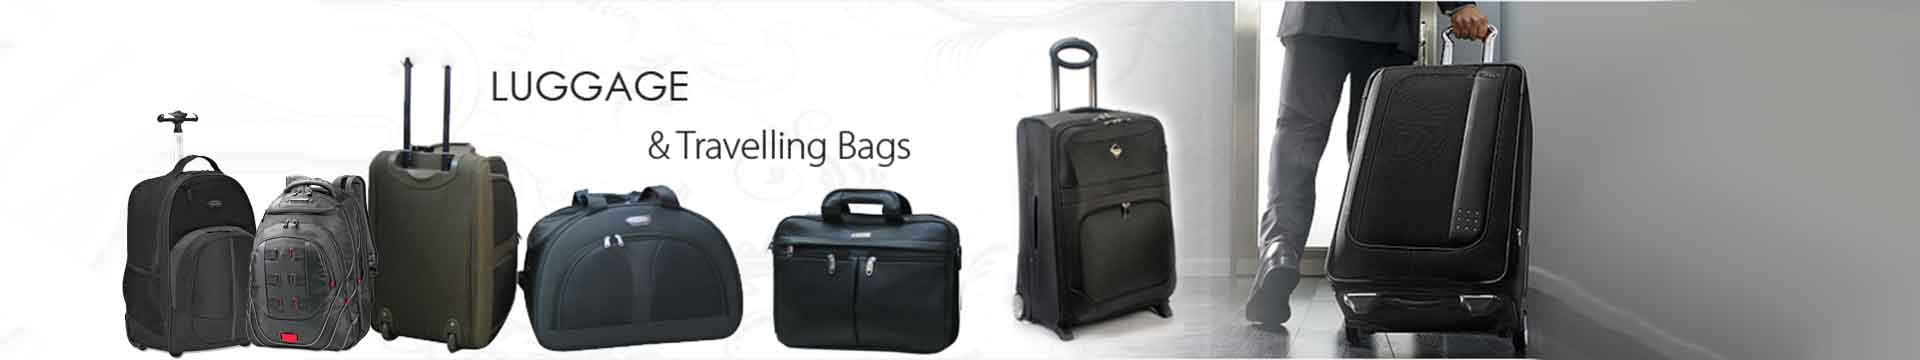 LUGGAGE, BACKPACK, CARRYING CASE, TRAVELING BAGS